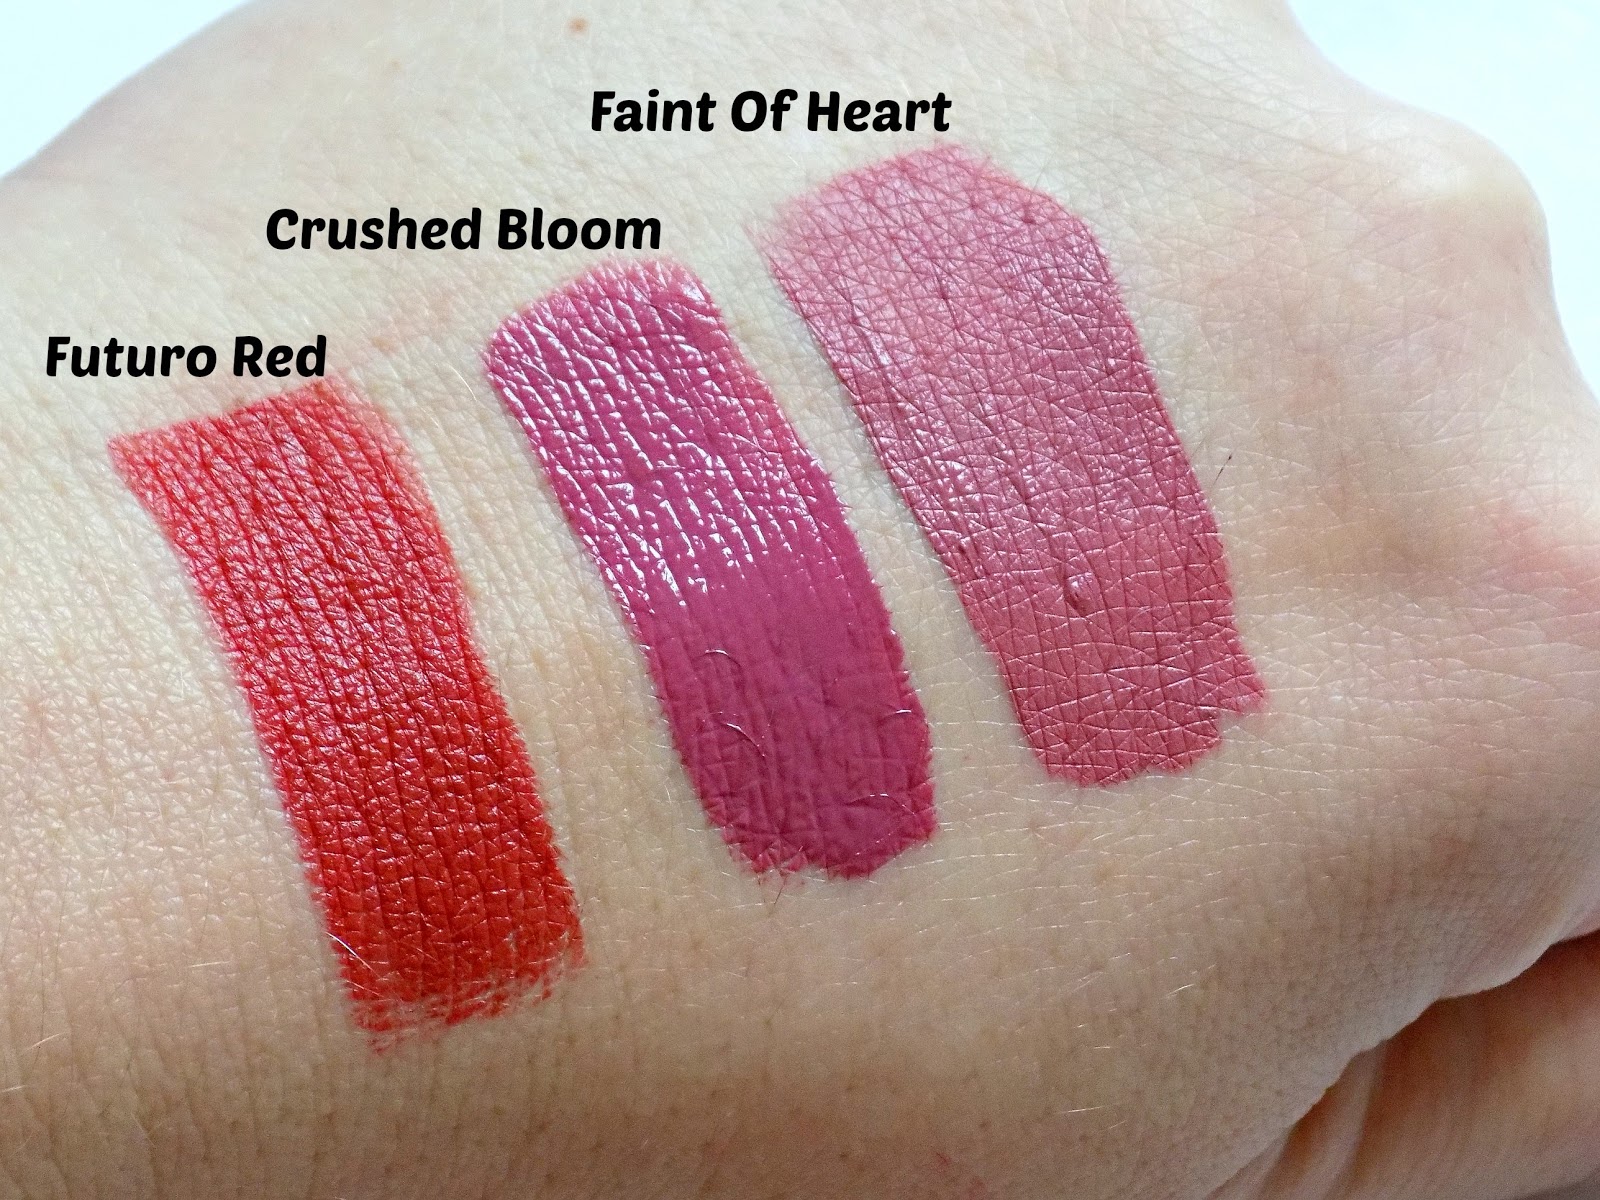 Zoeva Pure Lacquer Lips in Crushed Bloom, Pure Velour Lips in Faint Of Heart, Luxe Matte Lipstick in Futuro Red, swatches